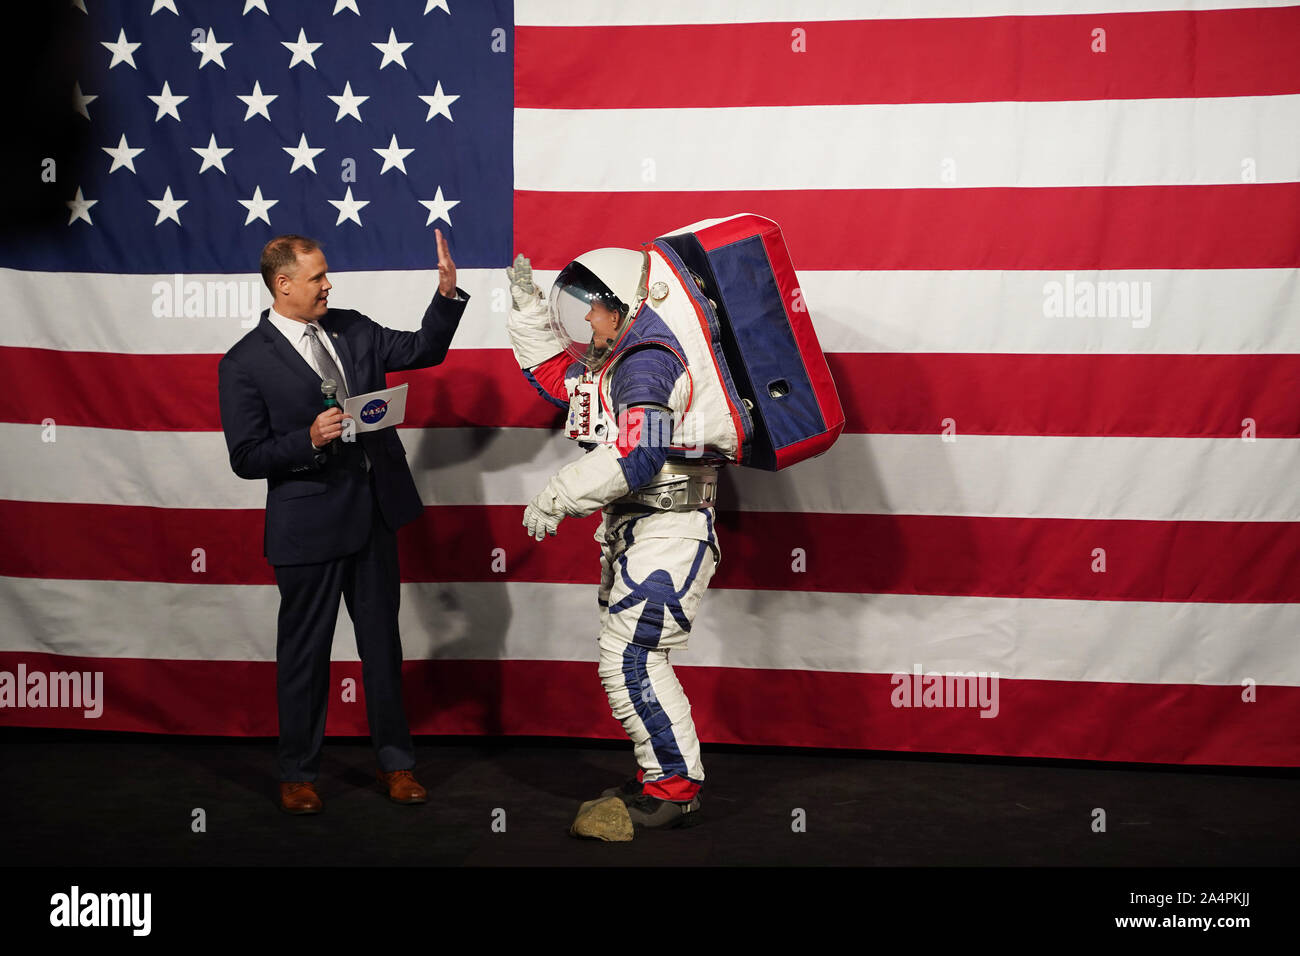 Washington, USA. 15th Oct, 2019. NASA Administrator Jim Bridenstine (L) welcomes Advanced Space Suit Engineer Kristine Davis, who wears the Exploration Extravehicular Mobility Unit (xEMU) spacesuit, at NASA headquarters in Washington, DC, the United States, on Oct. 15, 2019. The U.S. space agency NASA unveiled on Tuesday the next-generation spacesuits to be used in its Artemis program that will send the first woman and next man to the Lunar South Pole by 2024. Credit: Liu Jie/Xinhua/Alamy Live News Stock Photo